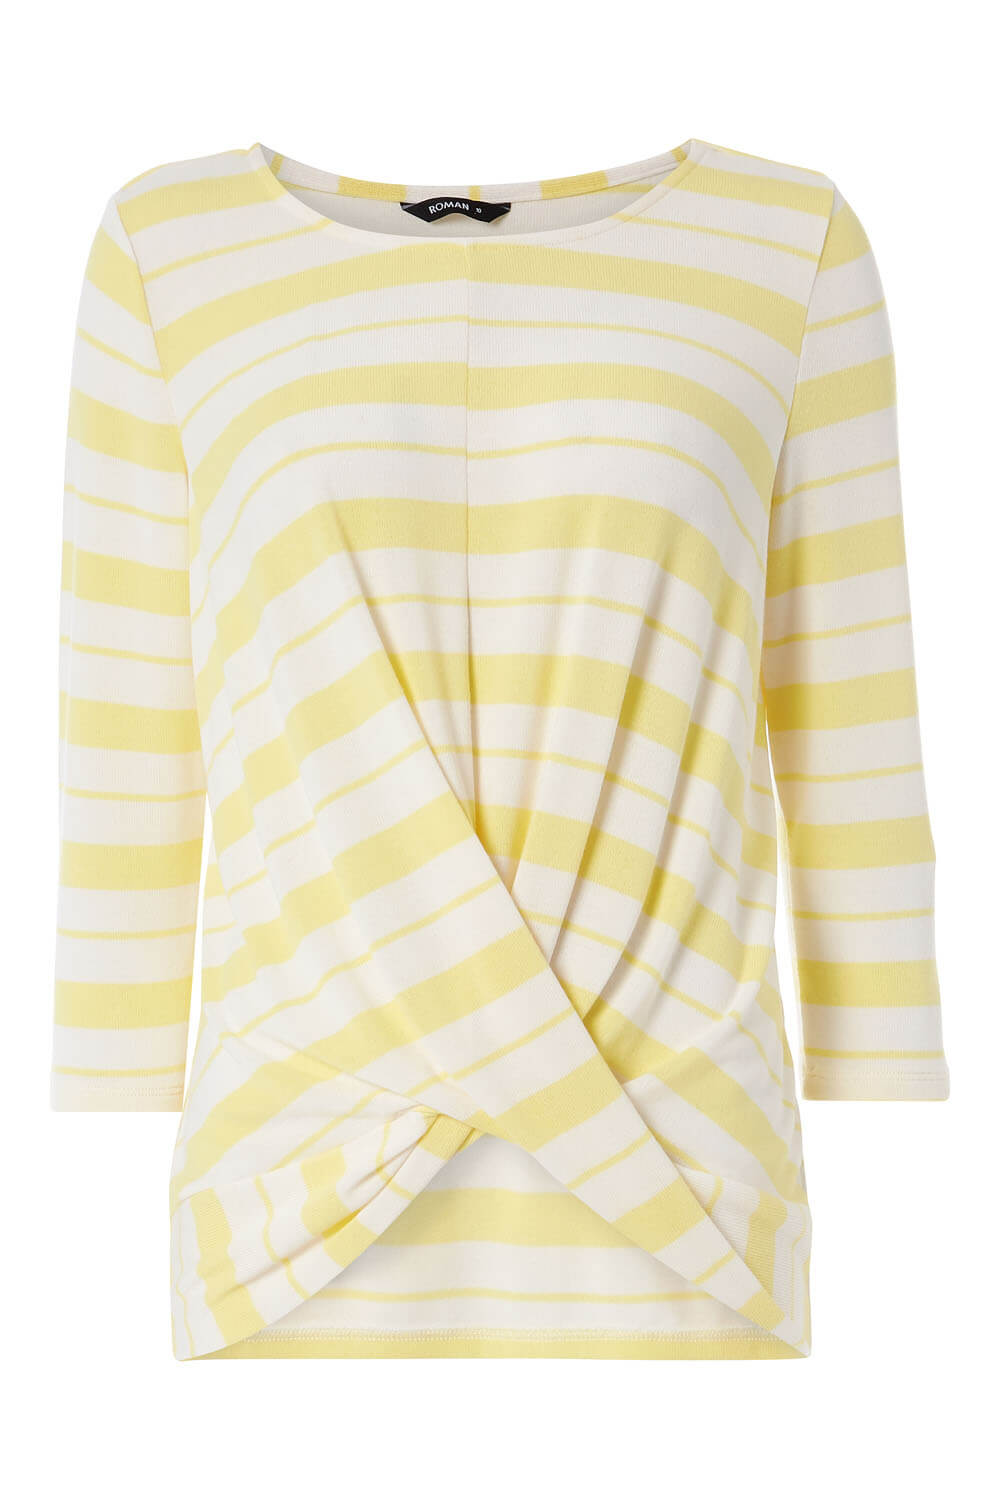 Yellow Abstract Stripe Twist Front Top, Image 5 of 5